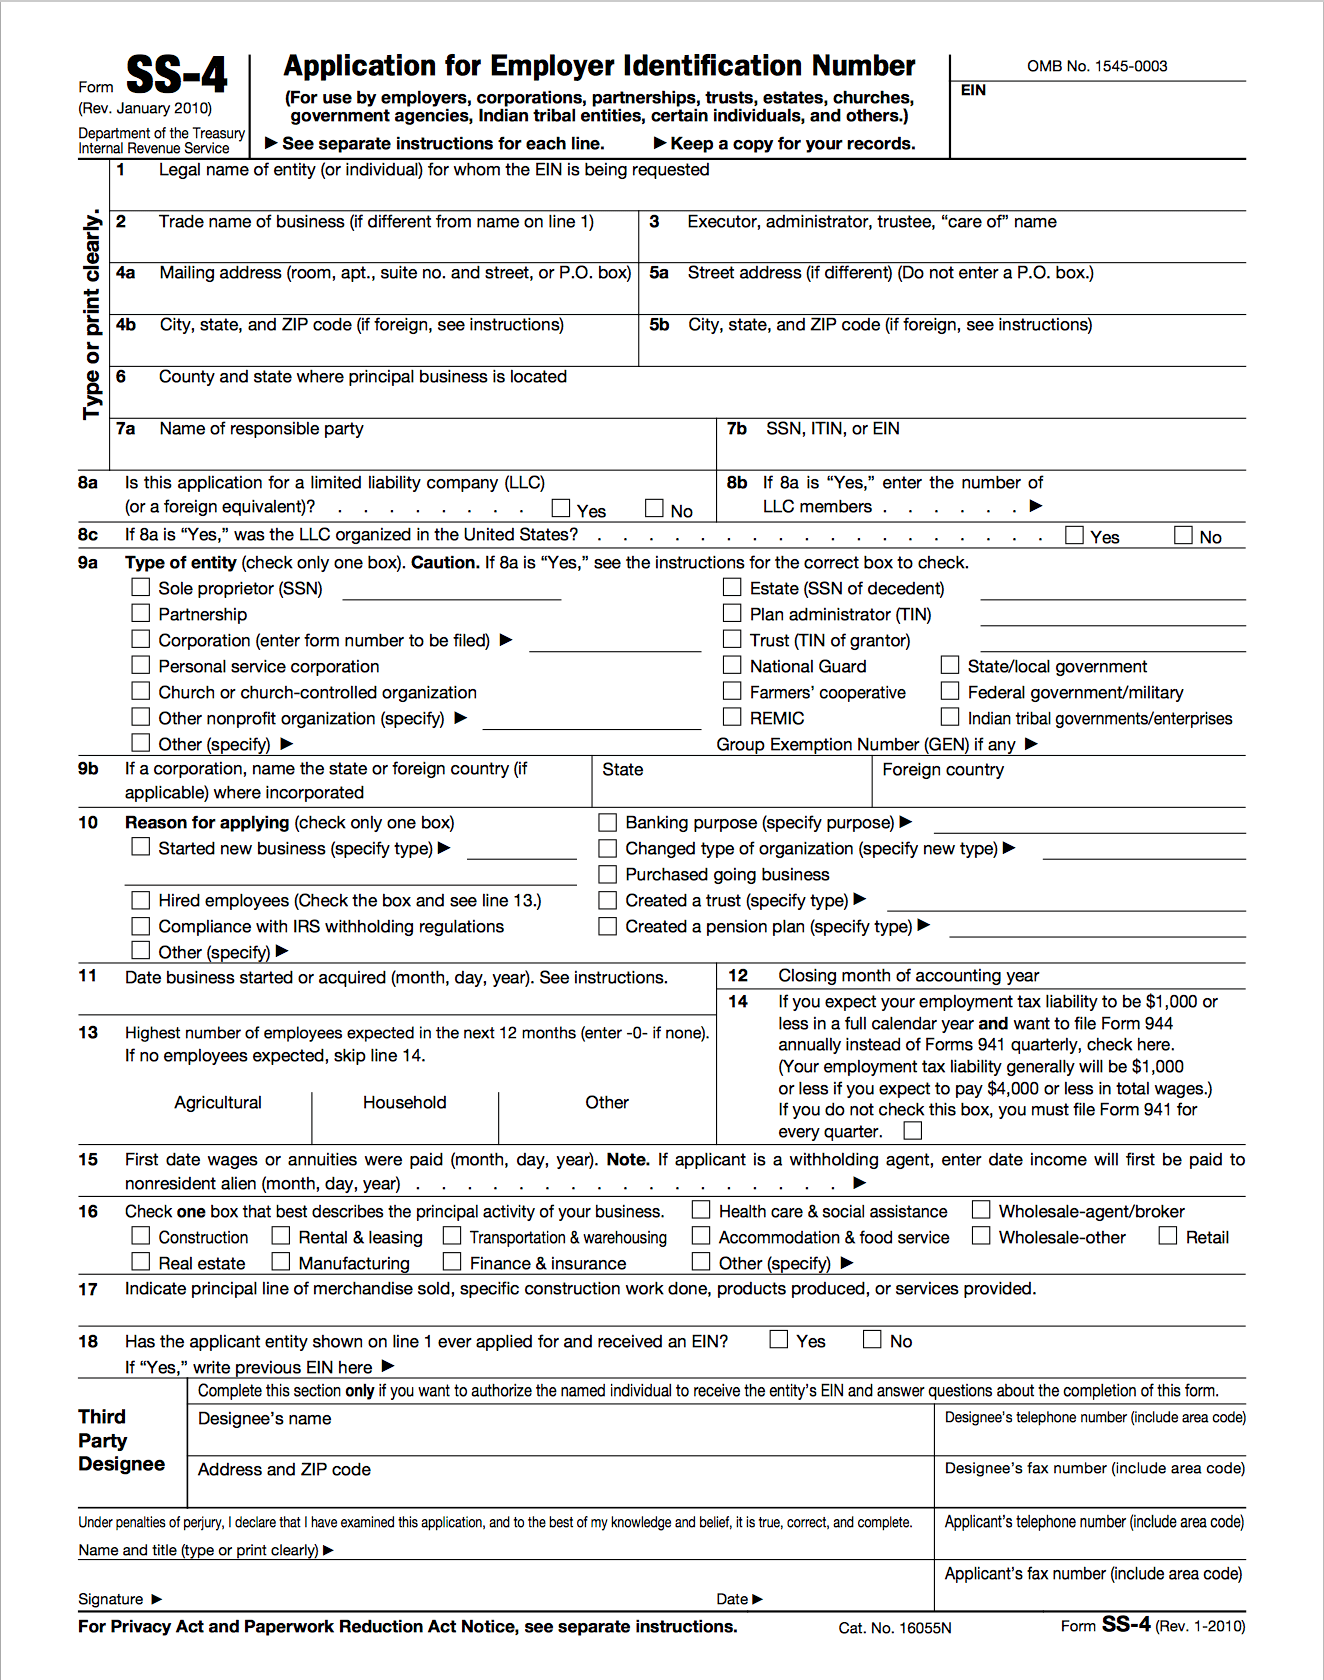 Screenshot of IRS form SS-4 to apply for EIN